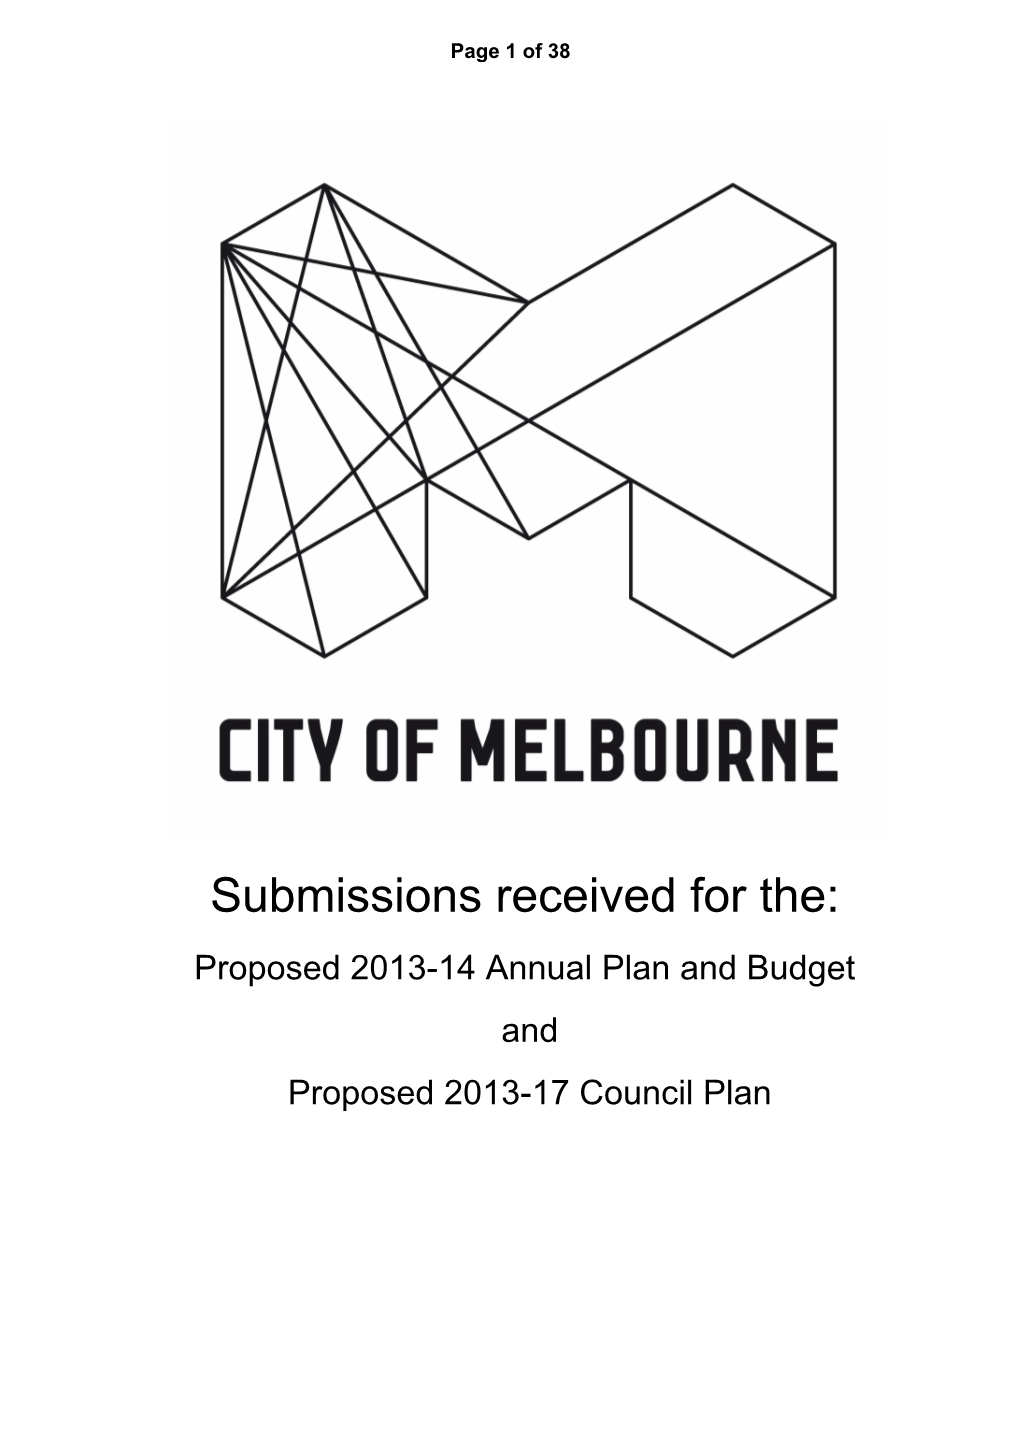 Submissions Received for The: Proposed 2013-14 Annual Plan and Budget and Proposed 2013-17 Council Plan